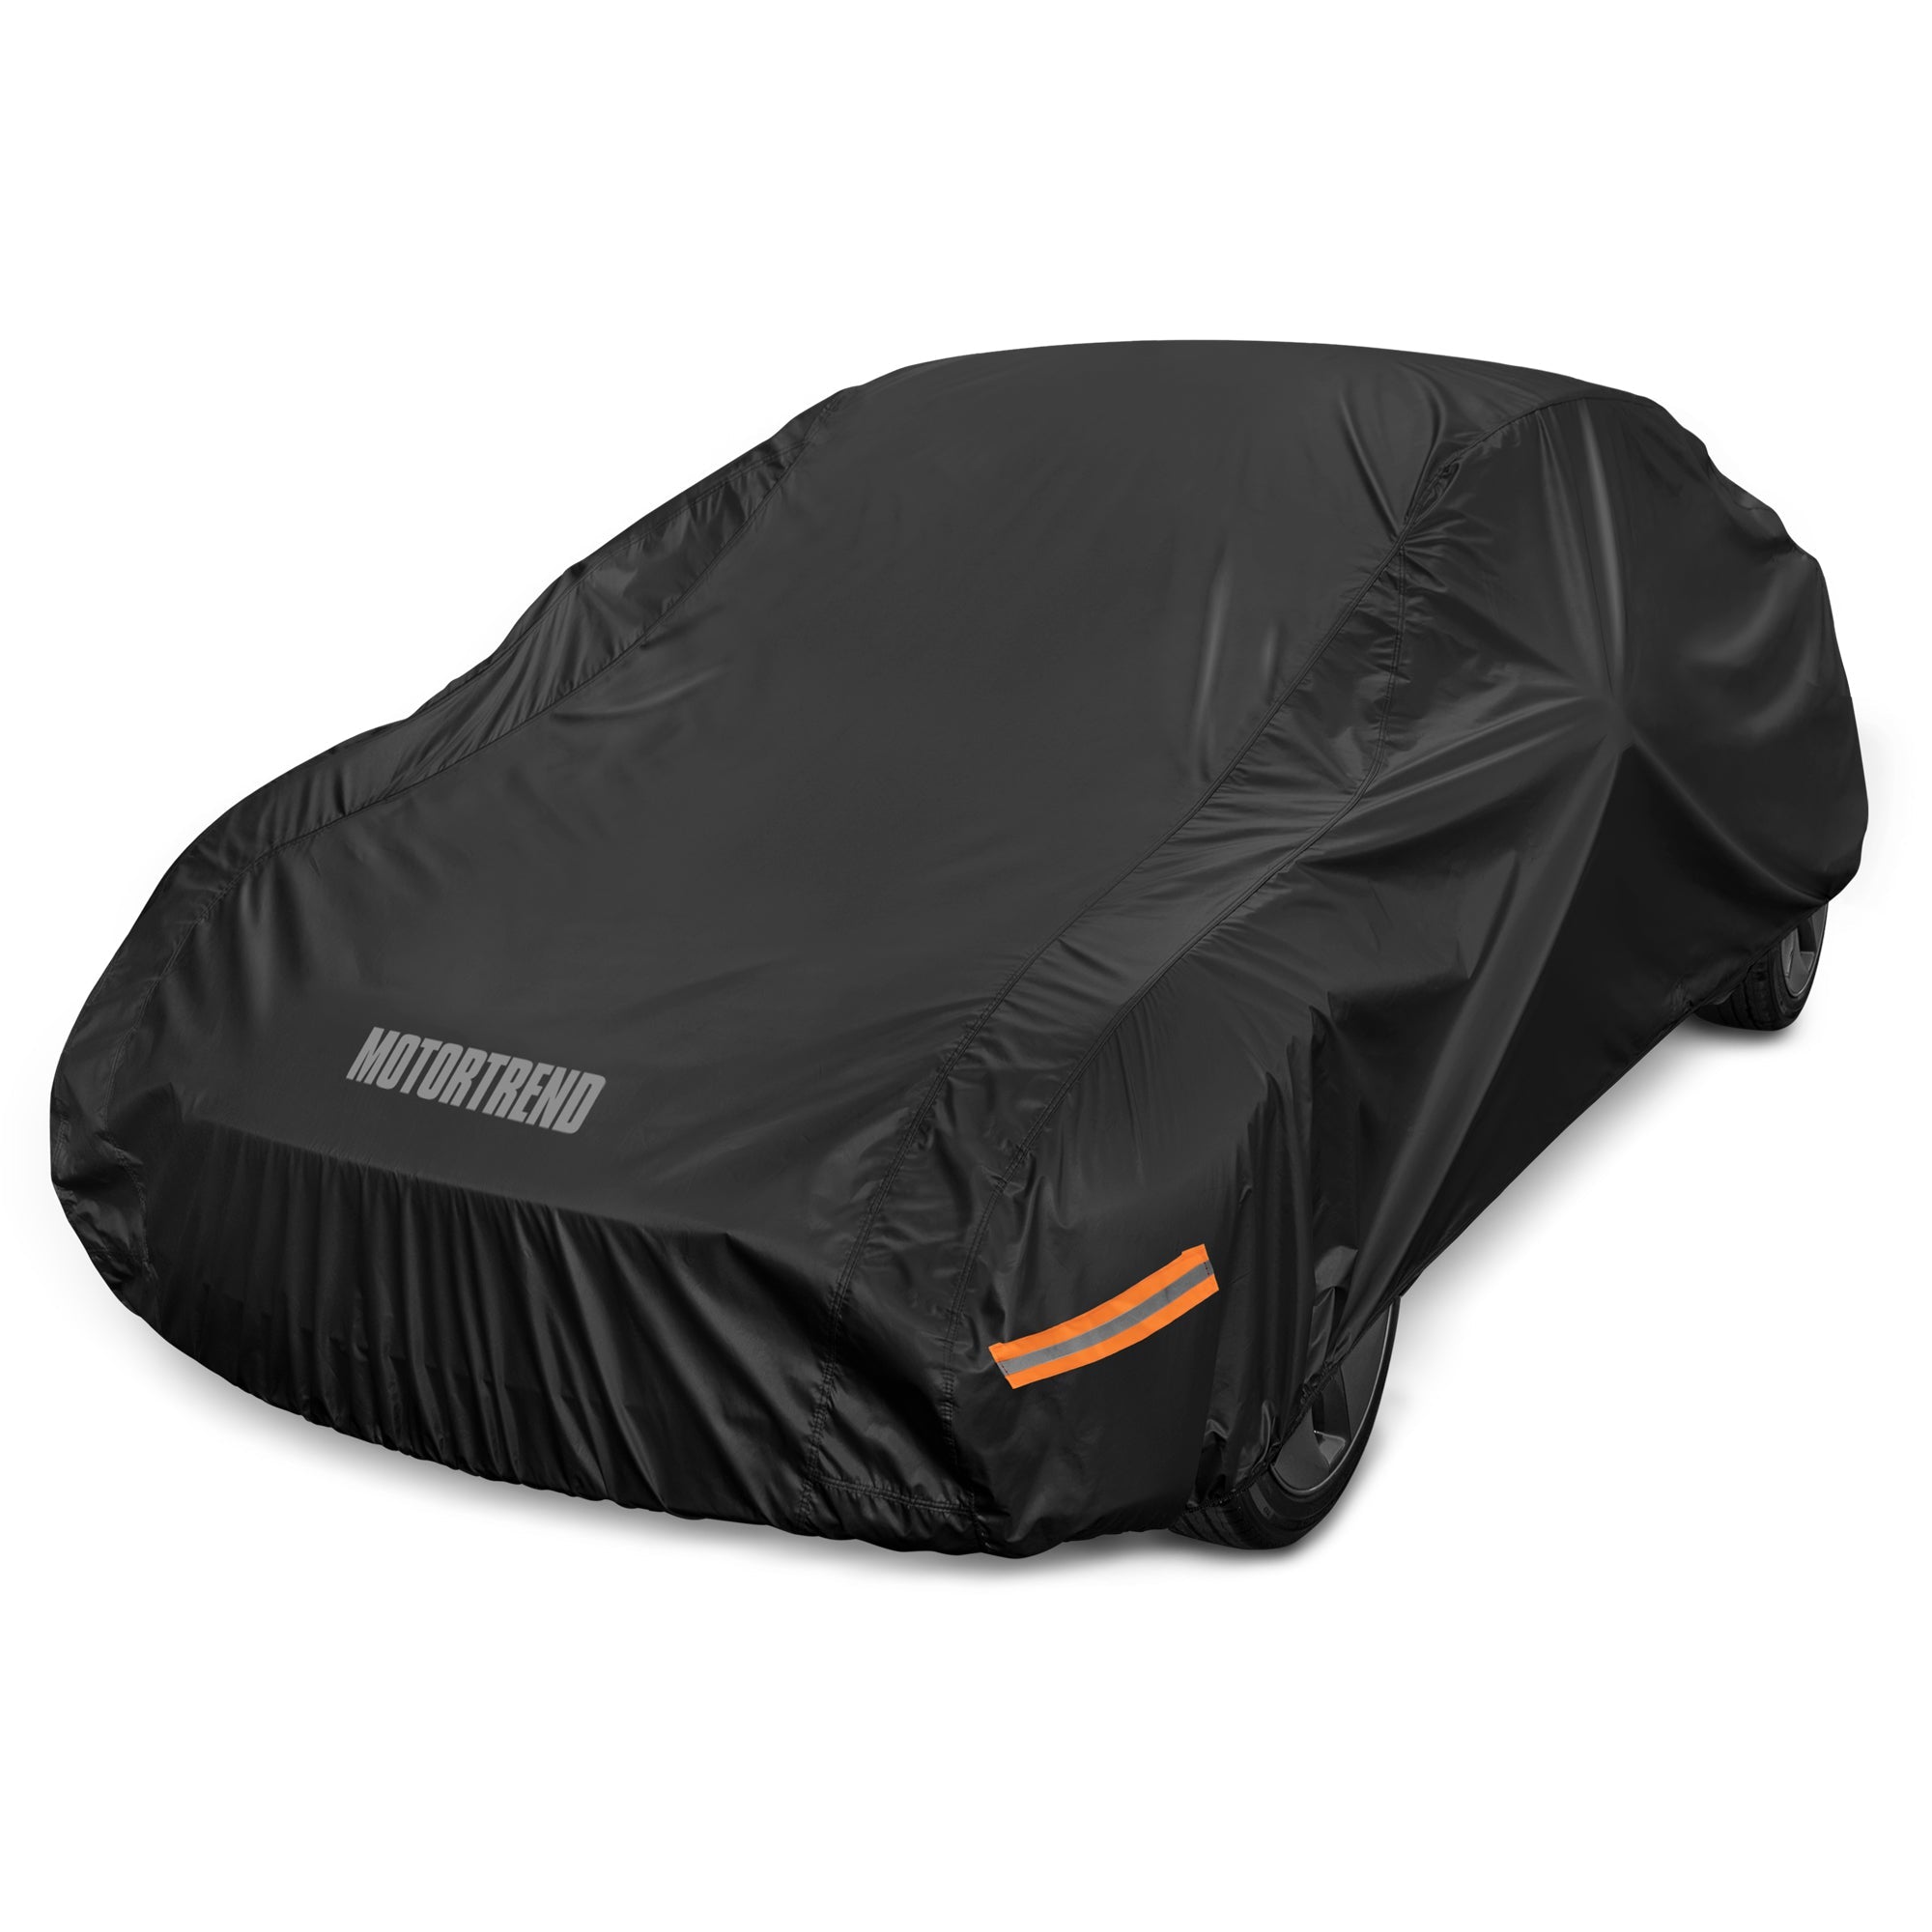 Motor Trend SafeKeeper All Weather Black Car Cover - Advanced Protection Formula - Waterproof 6-Layer for Outdoor Use, for Sedans Up to 210" L